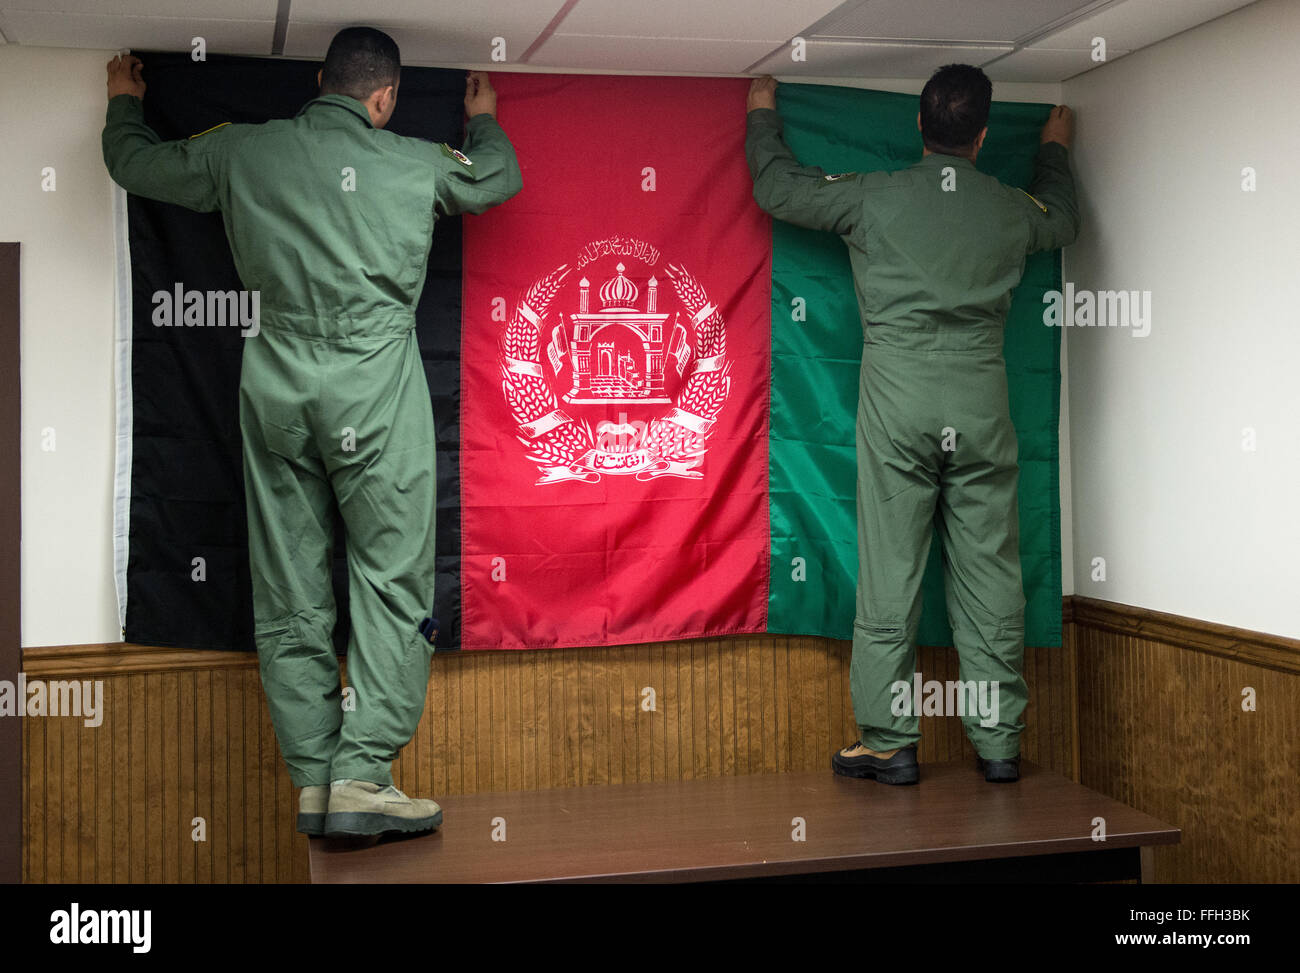 Afghan student pilots hang an Afghan flag on the wall of their training room at the 81st Fighter Squadron, Moody Air Force Base, Georgia. Moody was selected to host the training because of the available airspace, airfield and suitable facilities. Stock Photo